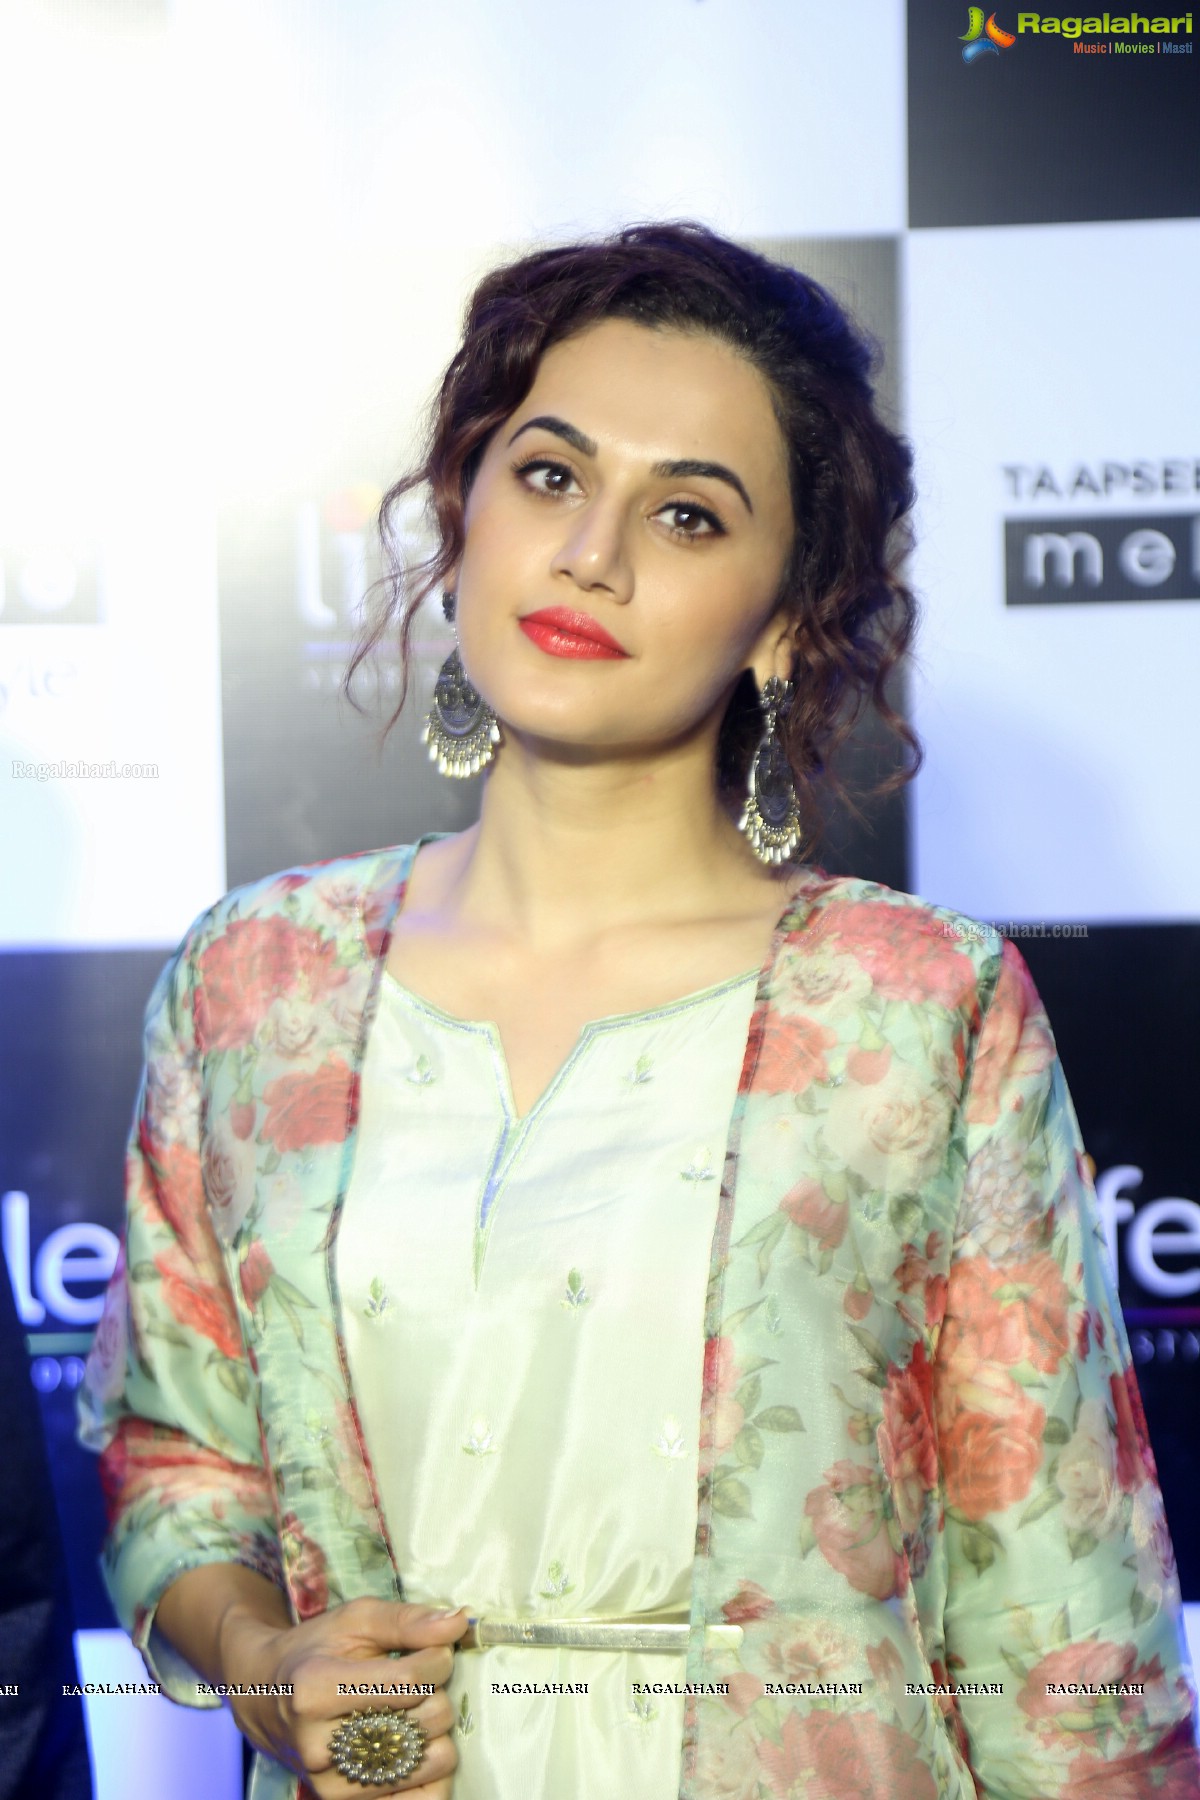 Taapsee at Lifestyle Festive Collection Launch